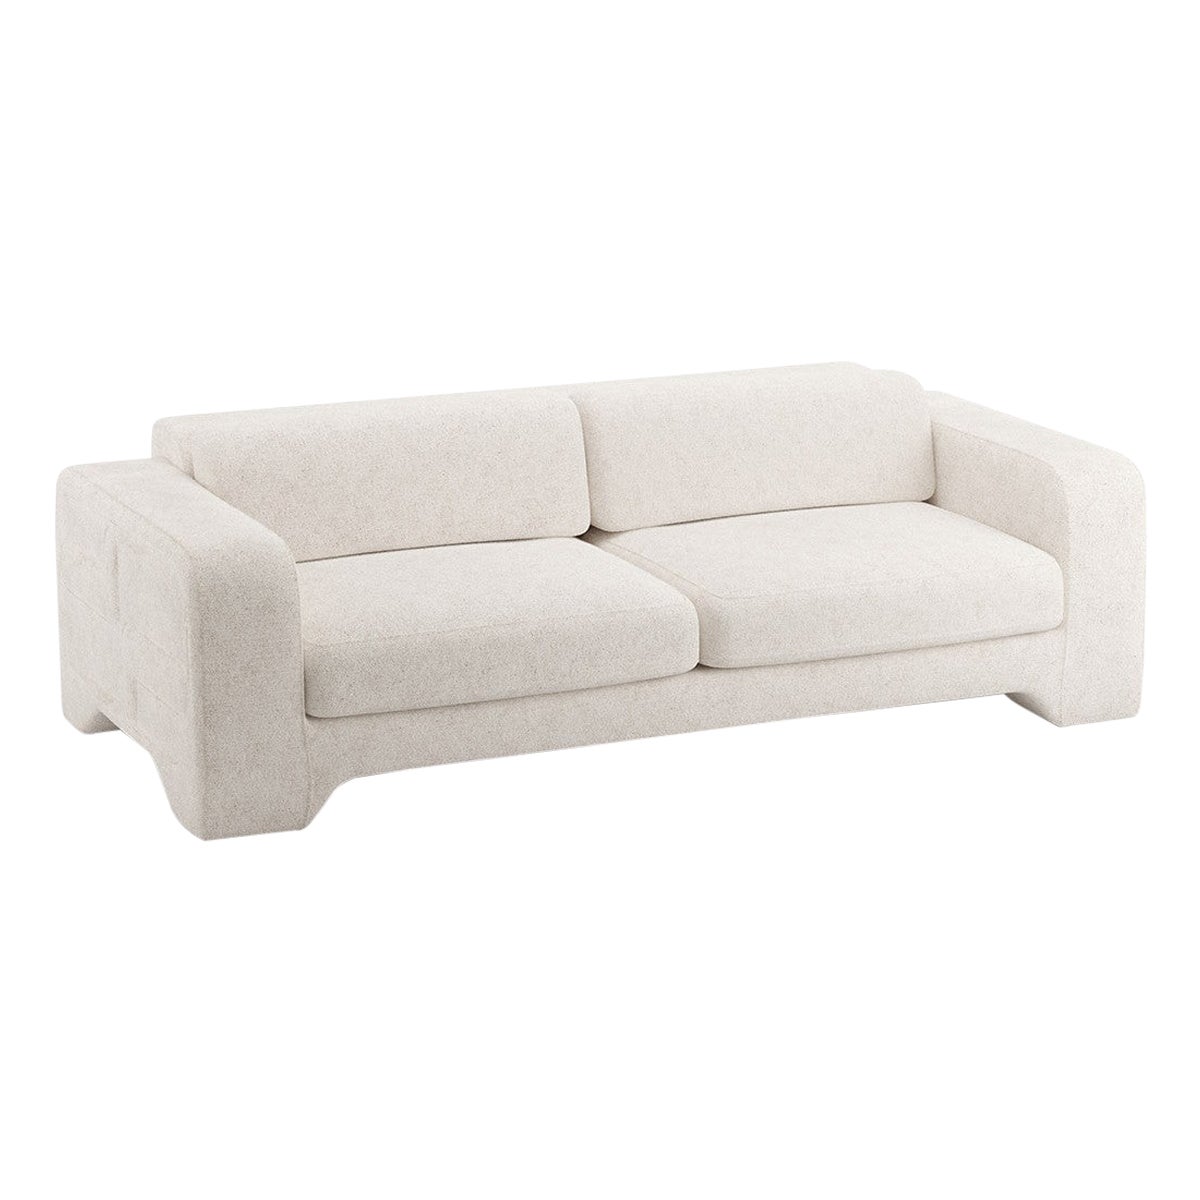 Popus Editions Giovanna 2.5 Seater Sofa in Gray Antwerp Linen Upholstery For Sale